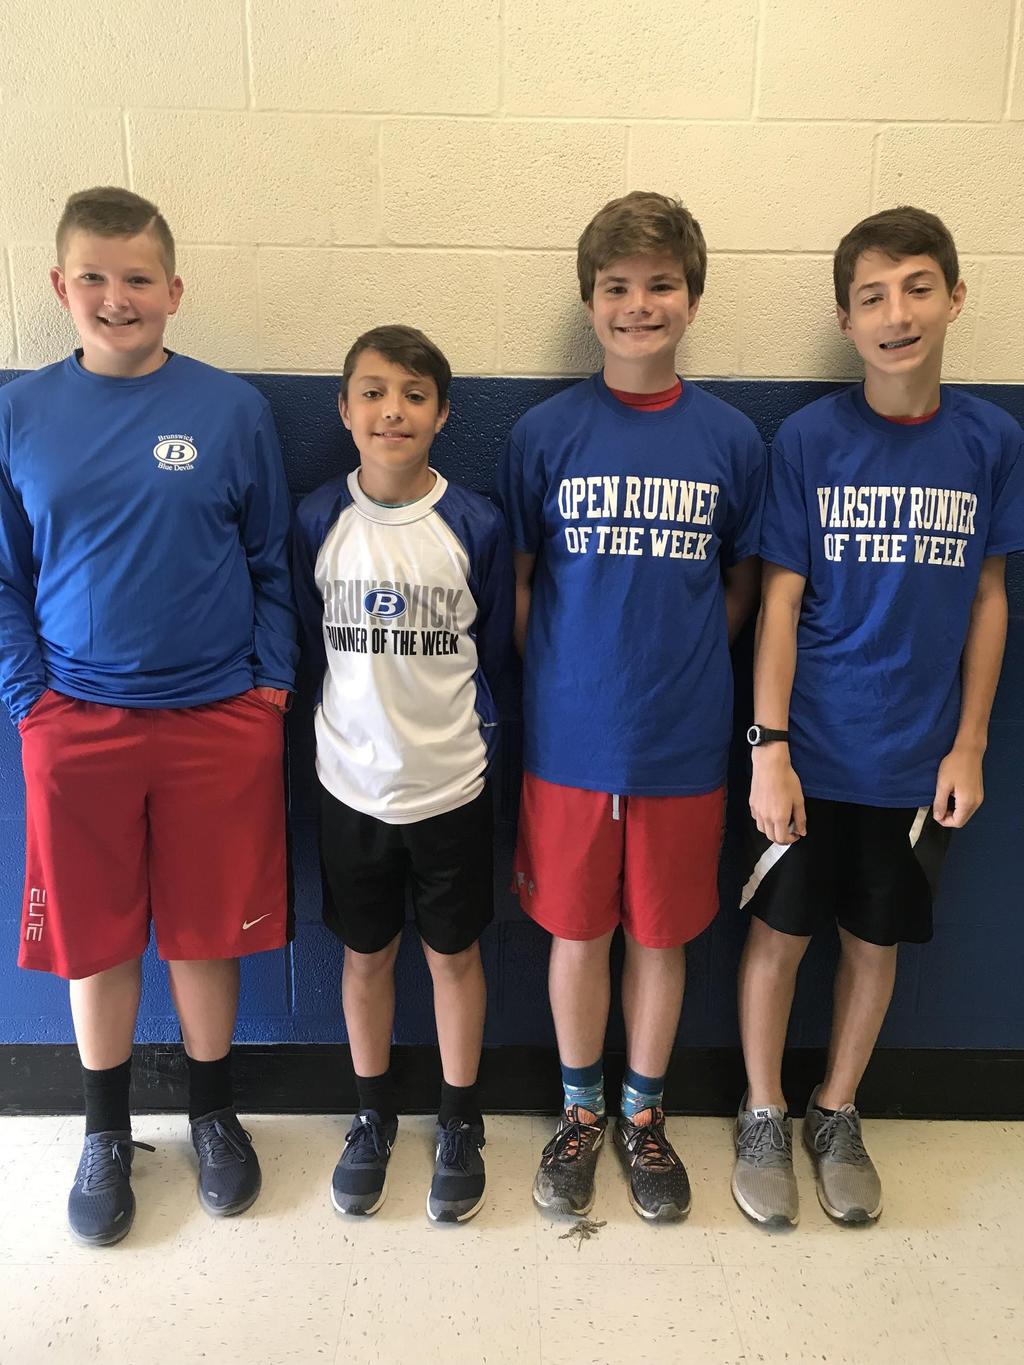 Boys Cross Country Runners of the Week from the Medina